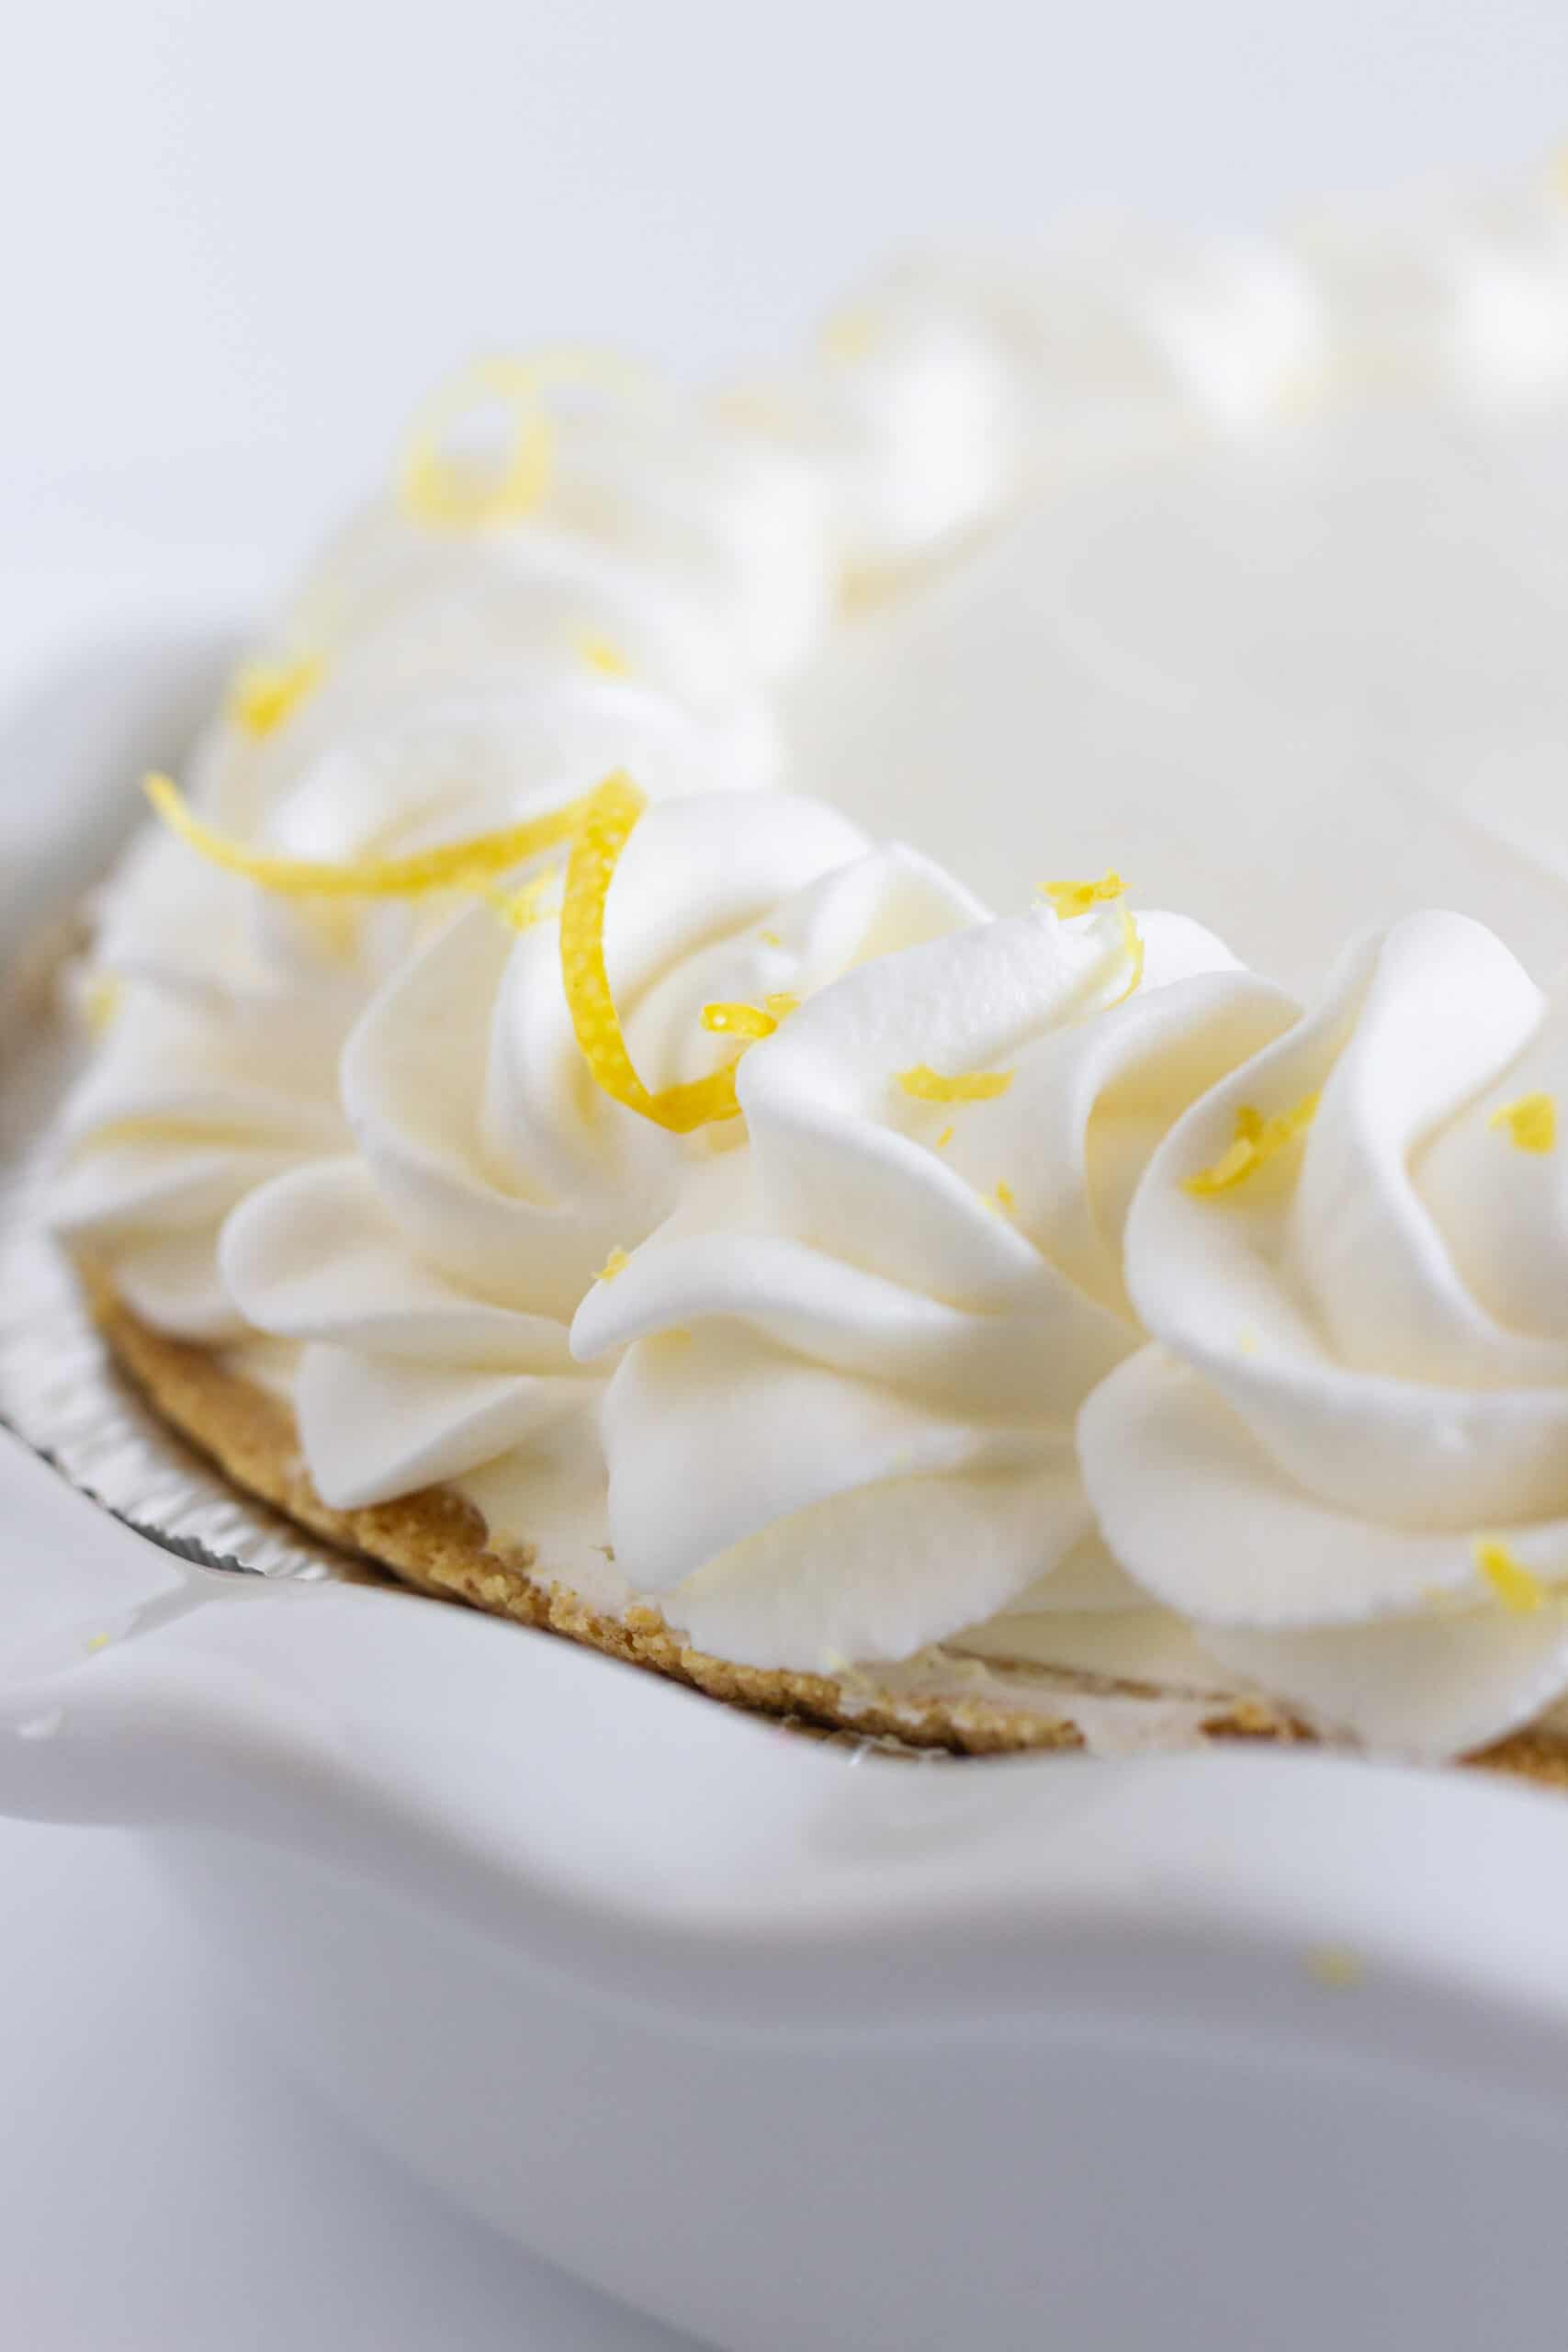 No Bake Lemon Cheesecake Recipe {5 Ingredients ONLY!}, by Top US dessert blog Practically Homemade